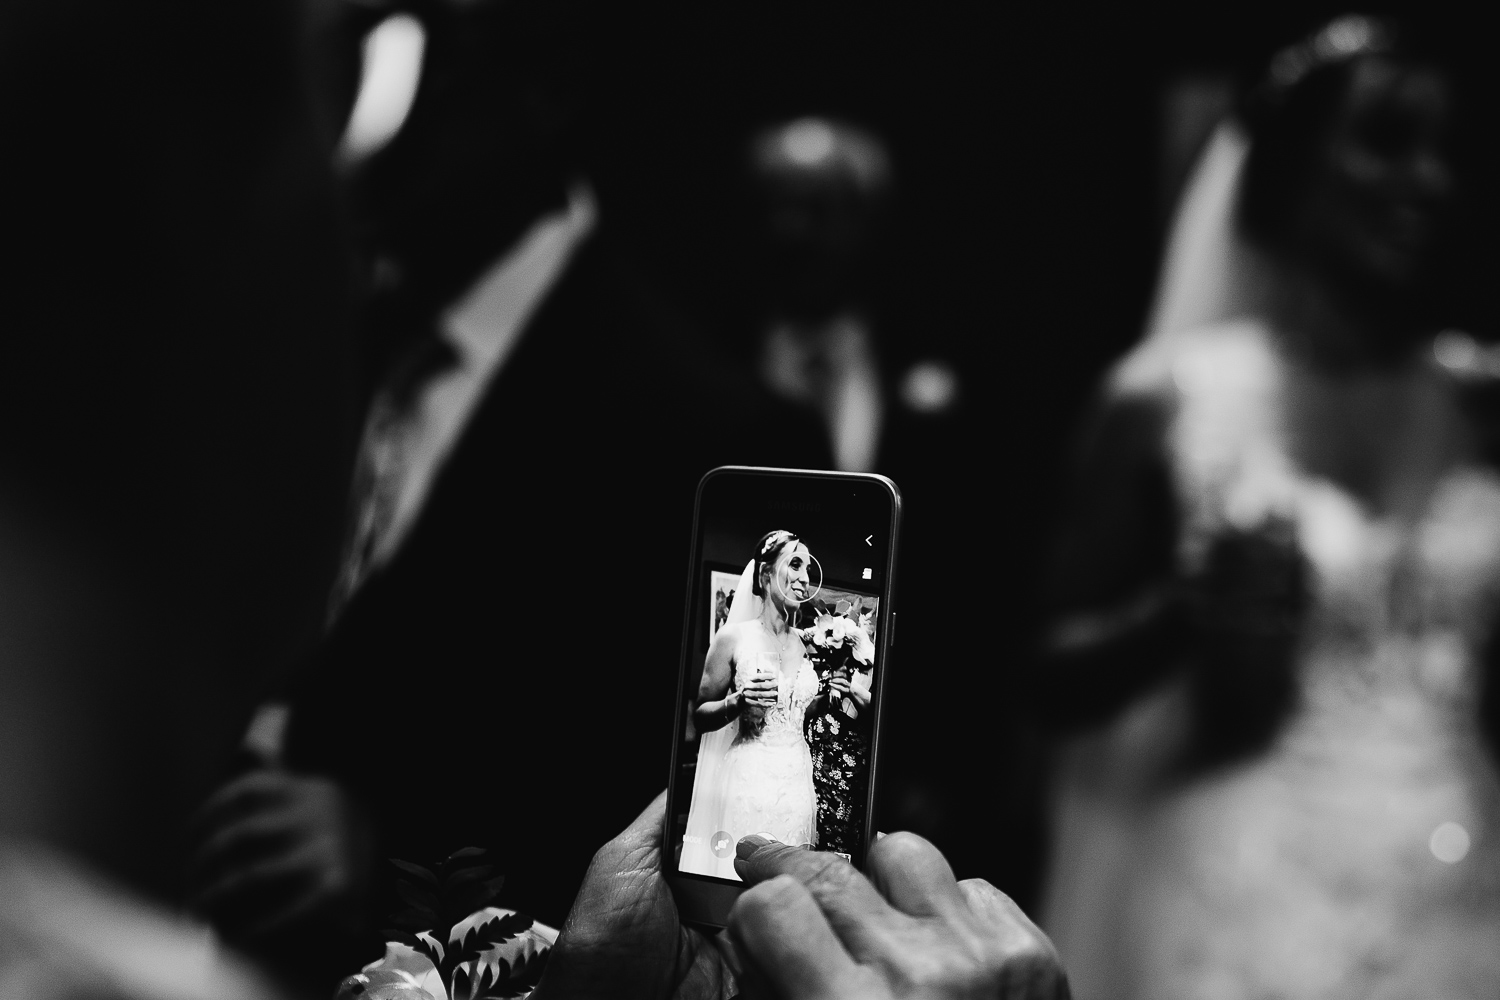 Someone taking a photo of the bride